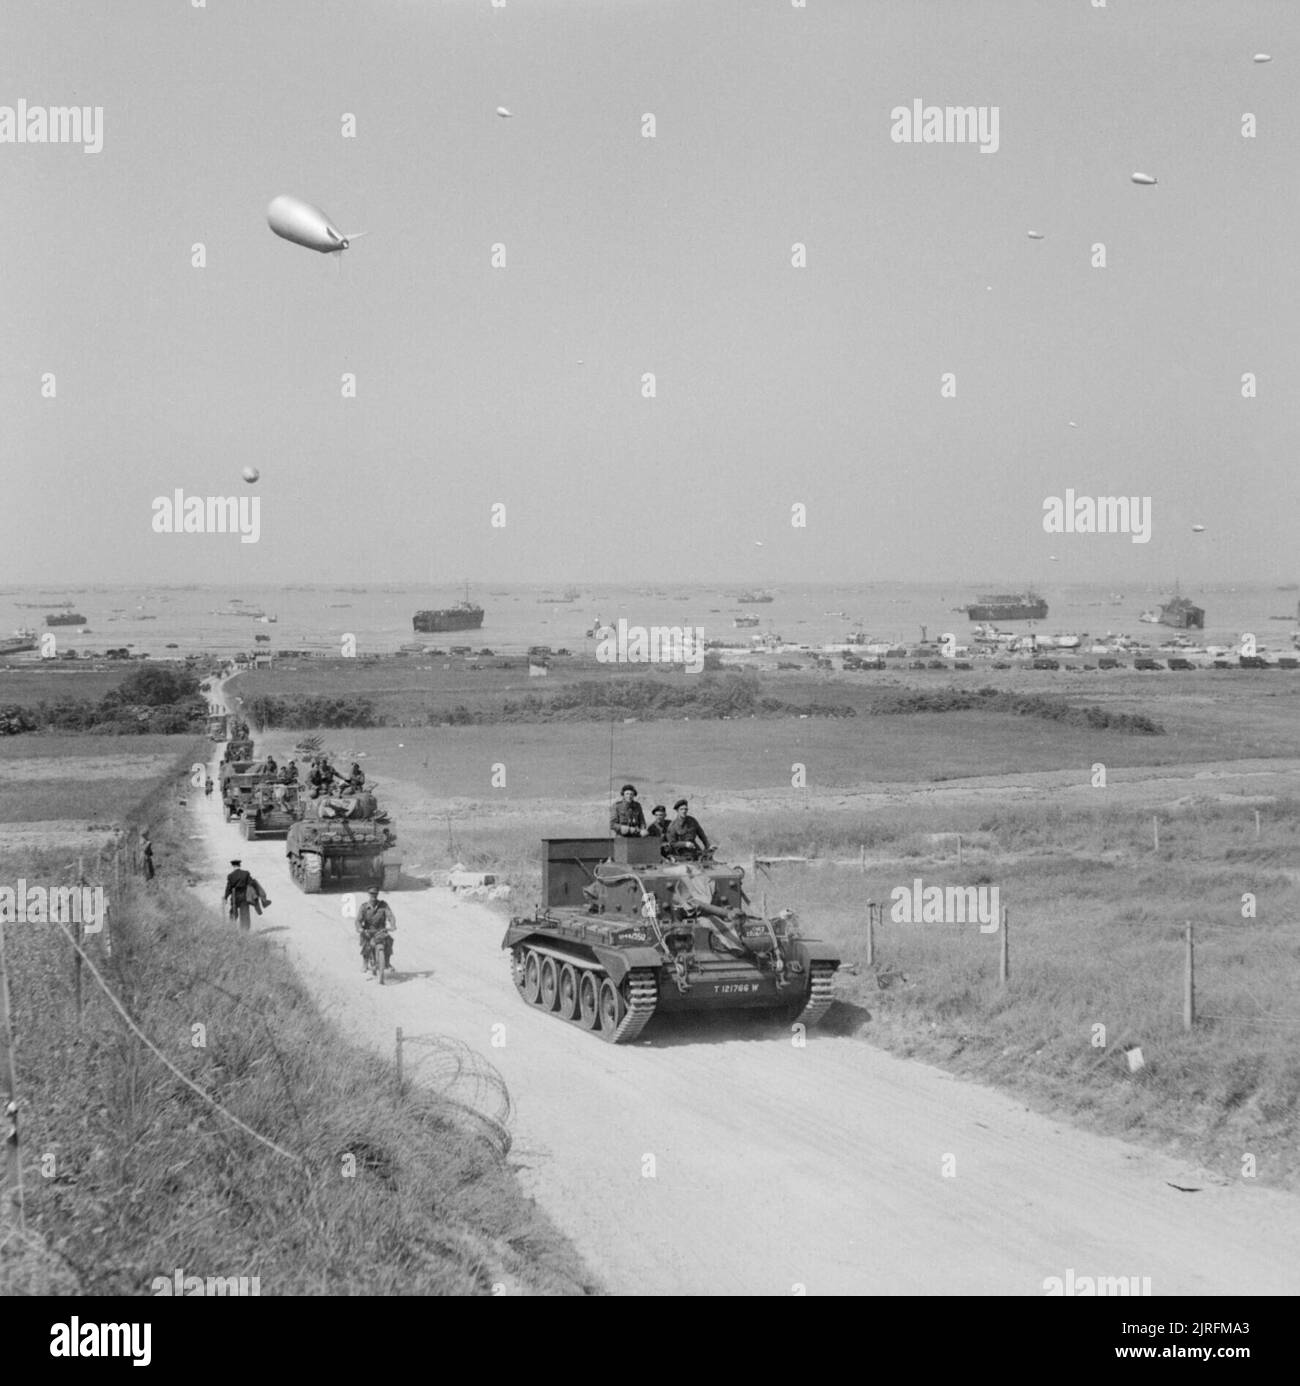 A Cromwell Mk V tank of 4th County of London Yeomanry, 22nd Armoured Brigade, 7th Armoured Division, leads a column of armour and soft-skin vehicles inland from Gold Beach, Normandy, 7 June 1944. A Cromwell Mk V tank of 4th County of London Yeomanry, 22nd Armoured Brigade, 7th Armoured Division, leads a column of armour (including a Sherman Firefly immediately behind) and soft-skin vehicles inland from King beach, Gold area, 7 June 1944. Stock Photo